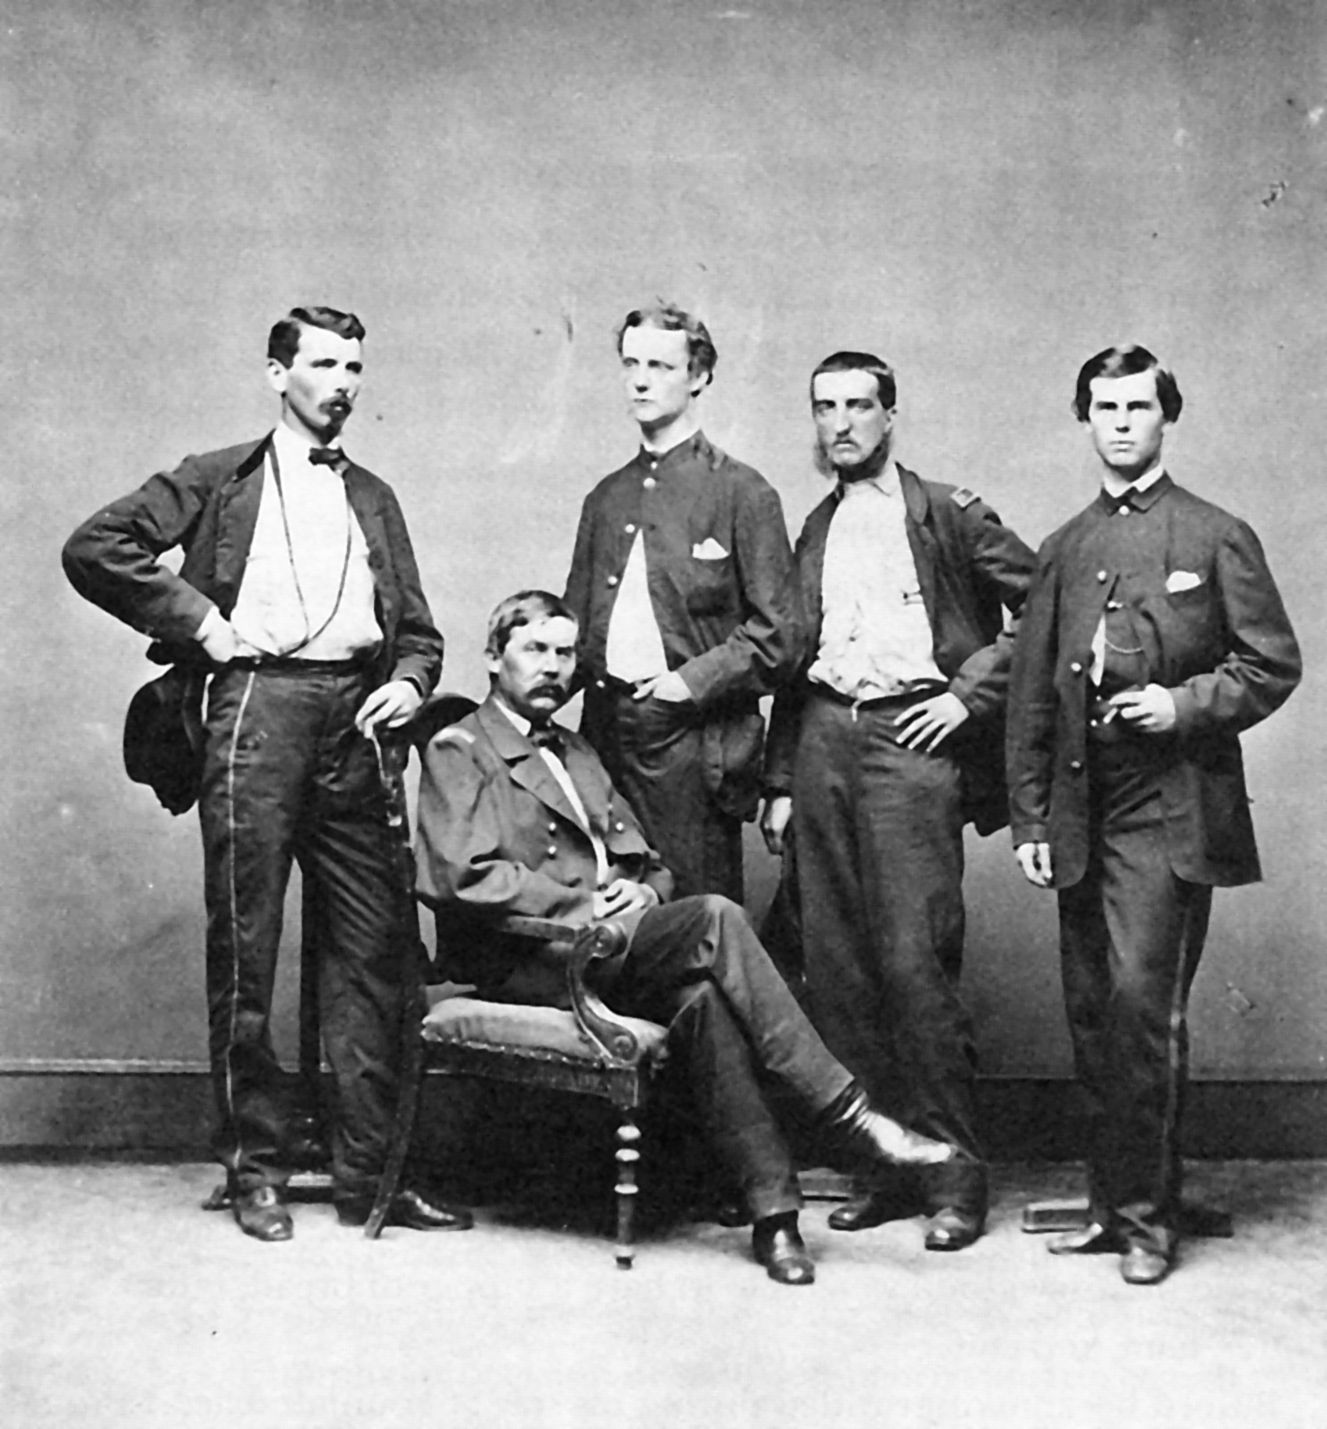 General Buford (seated) & staff, 1863. Capt. Myles Keogh stands at far left (Library of Congress)